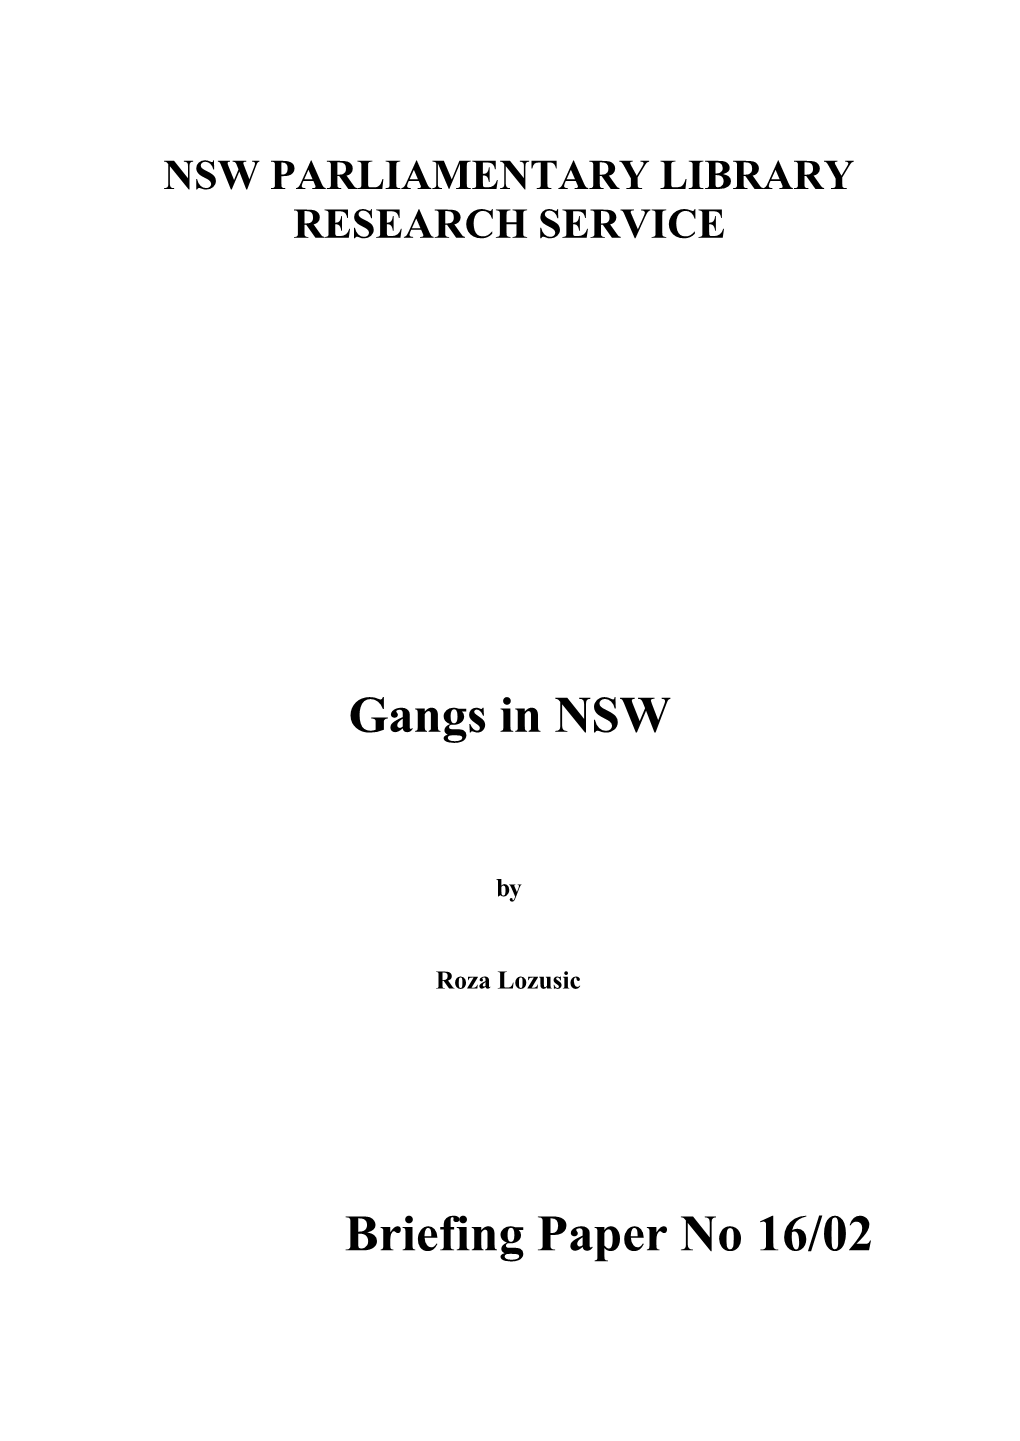 Gangs in NSW Briefing Paper No 16/02